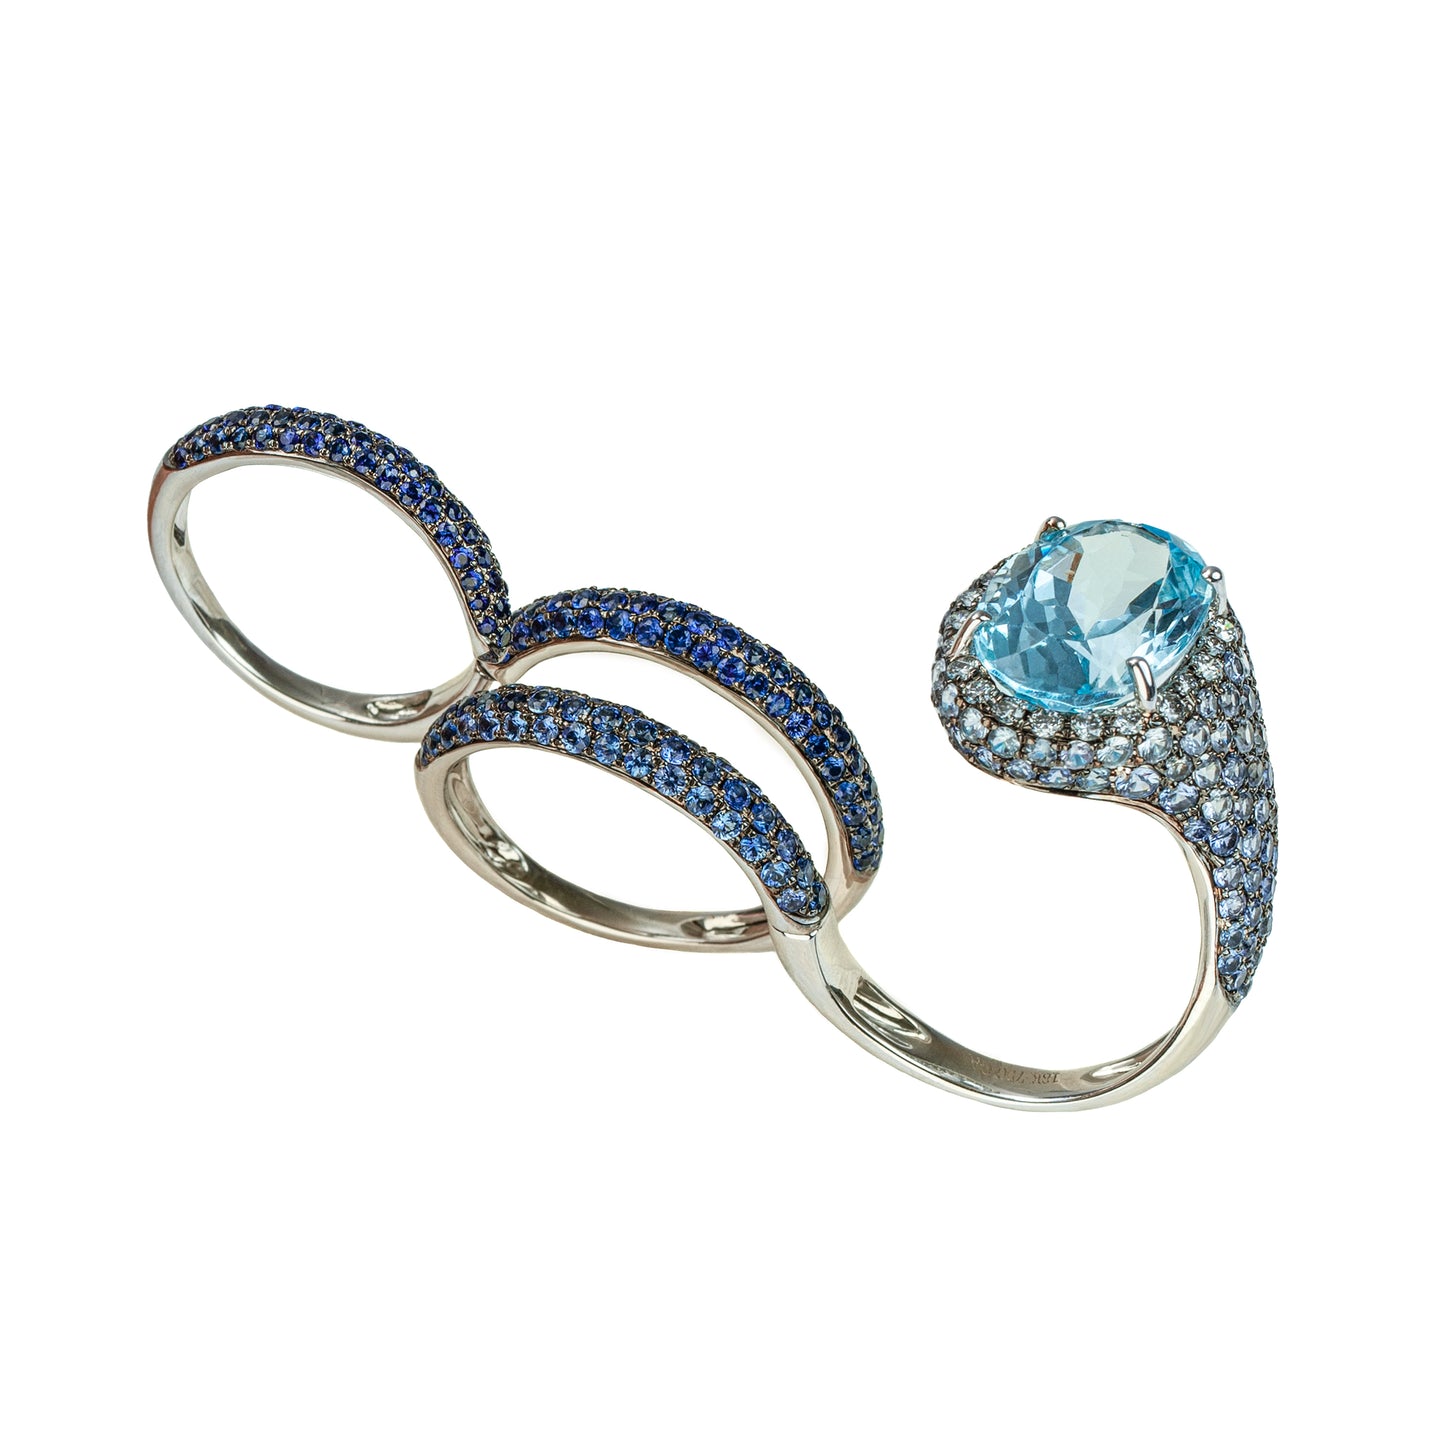 Blue Sapphire and Blue Topaz Coiled Ring with White Diamond Halo from Convertible Collection